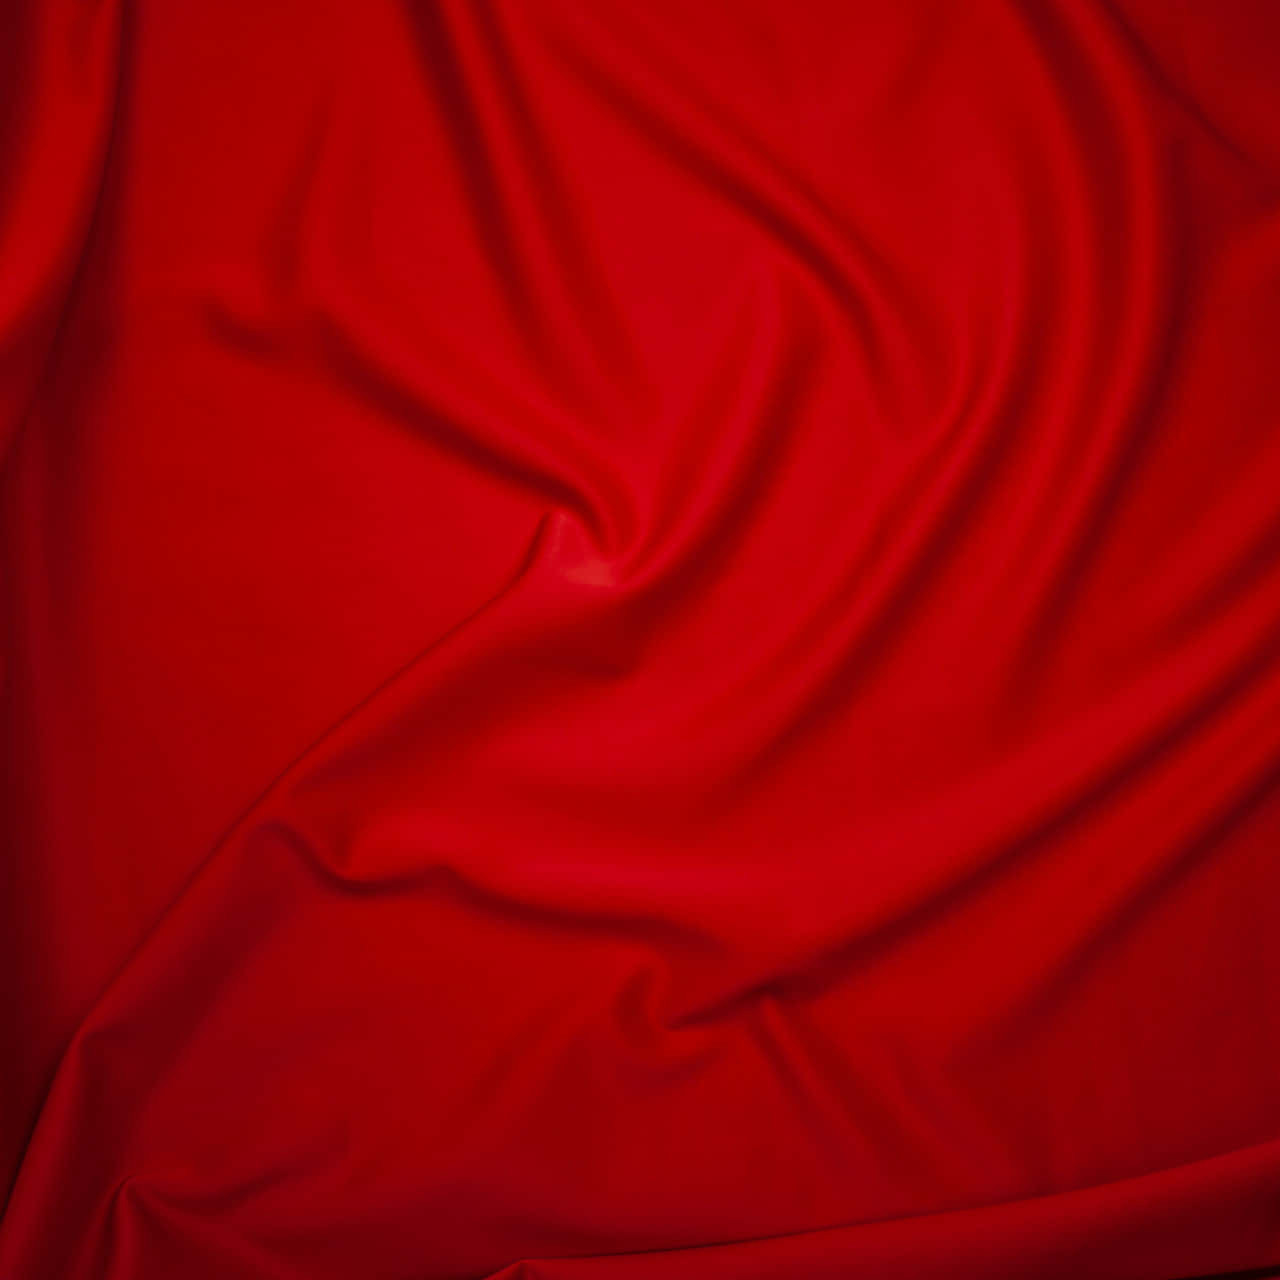 HD red silk fabric texture wallpapers